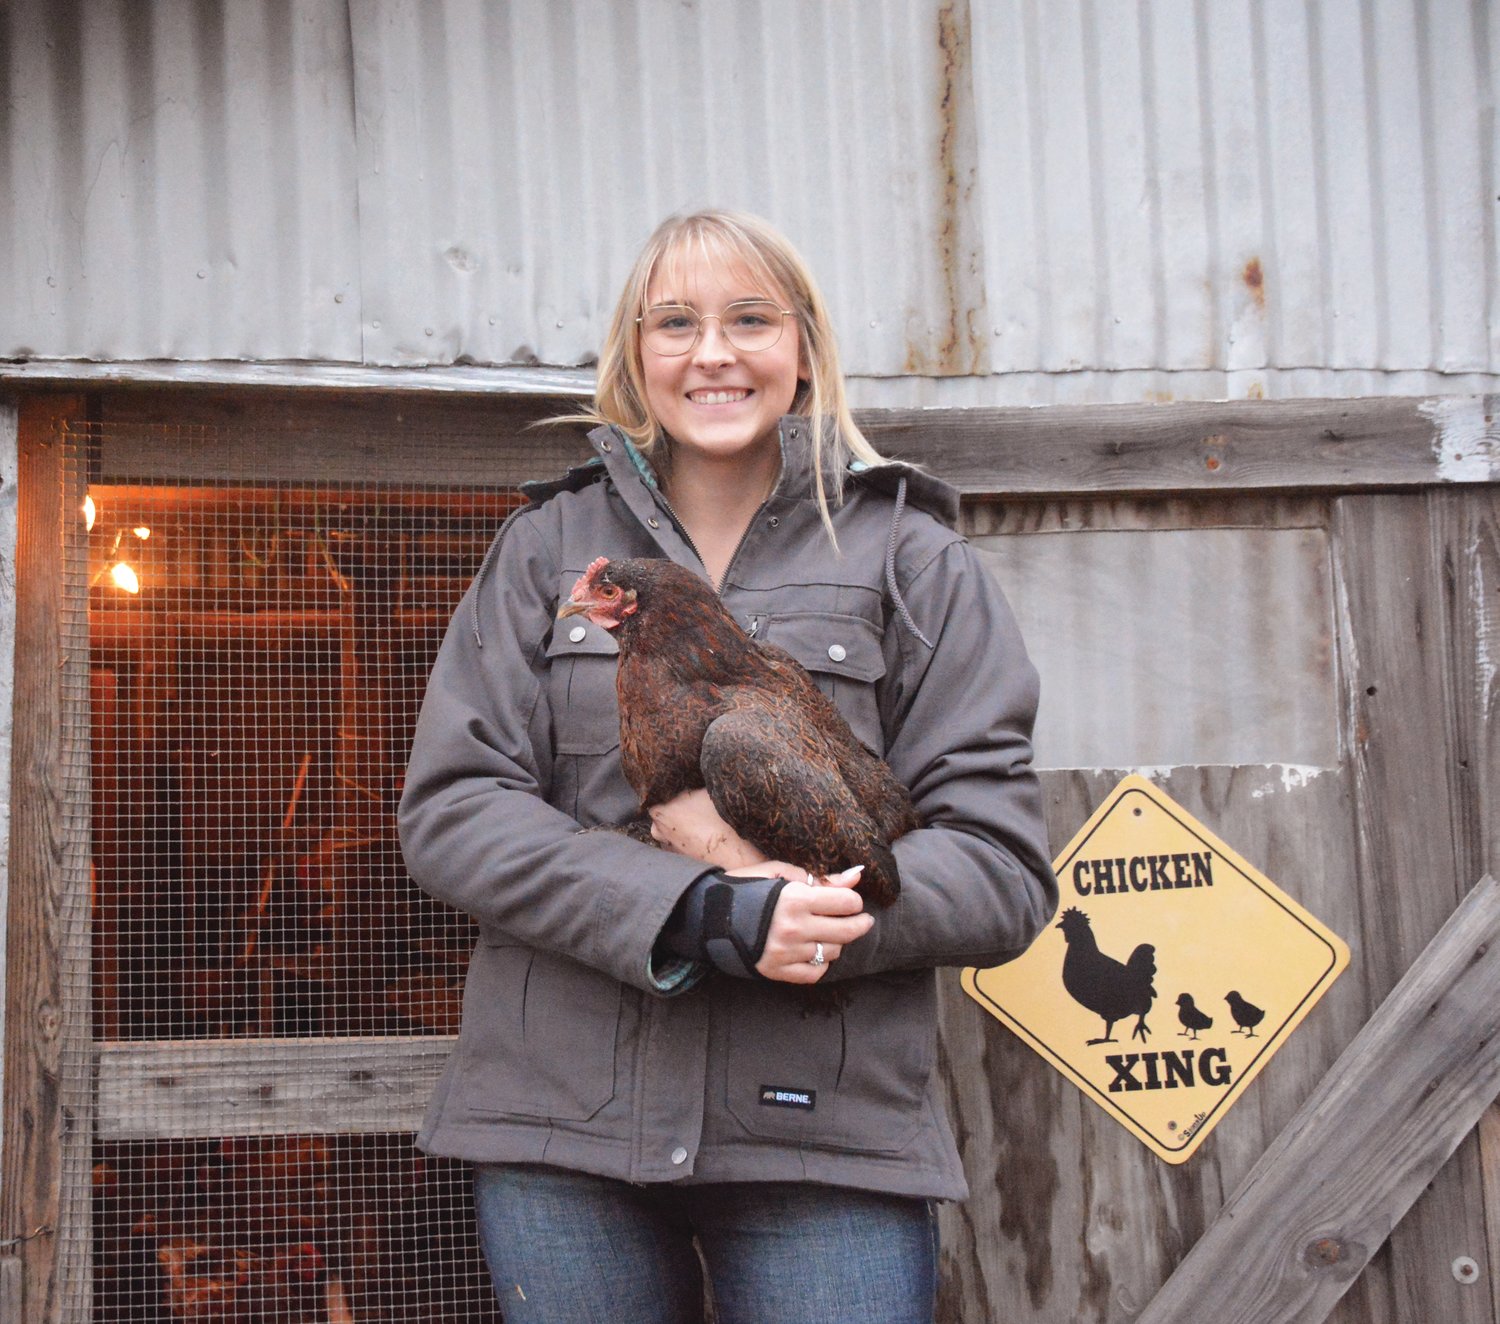 Adrian Brinkerhoff and her chicken, Harry, pose for a photo. Although her hens have avoided the most recent round of avian influenza, natural predators and higher feed prices are taking a toll on her backyard business.